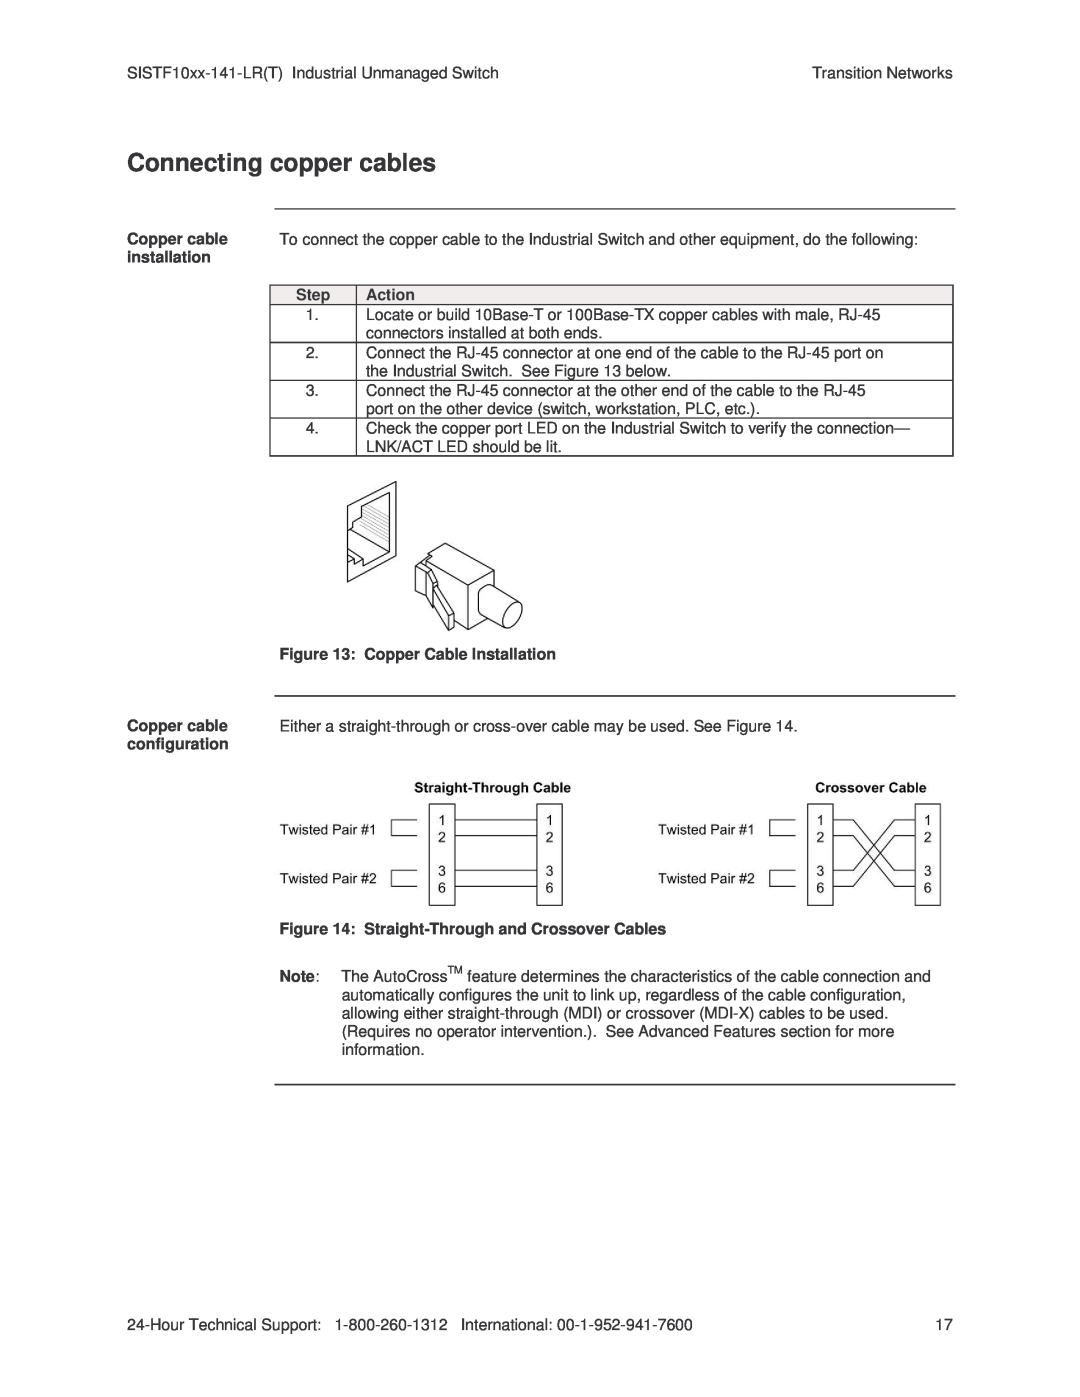 Transition Networks SISTF10xx-141-LR(T) installation manual Connecting copper cables 